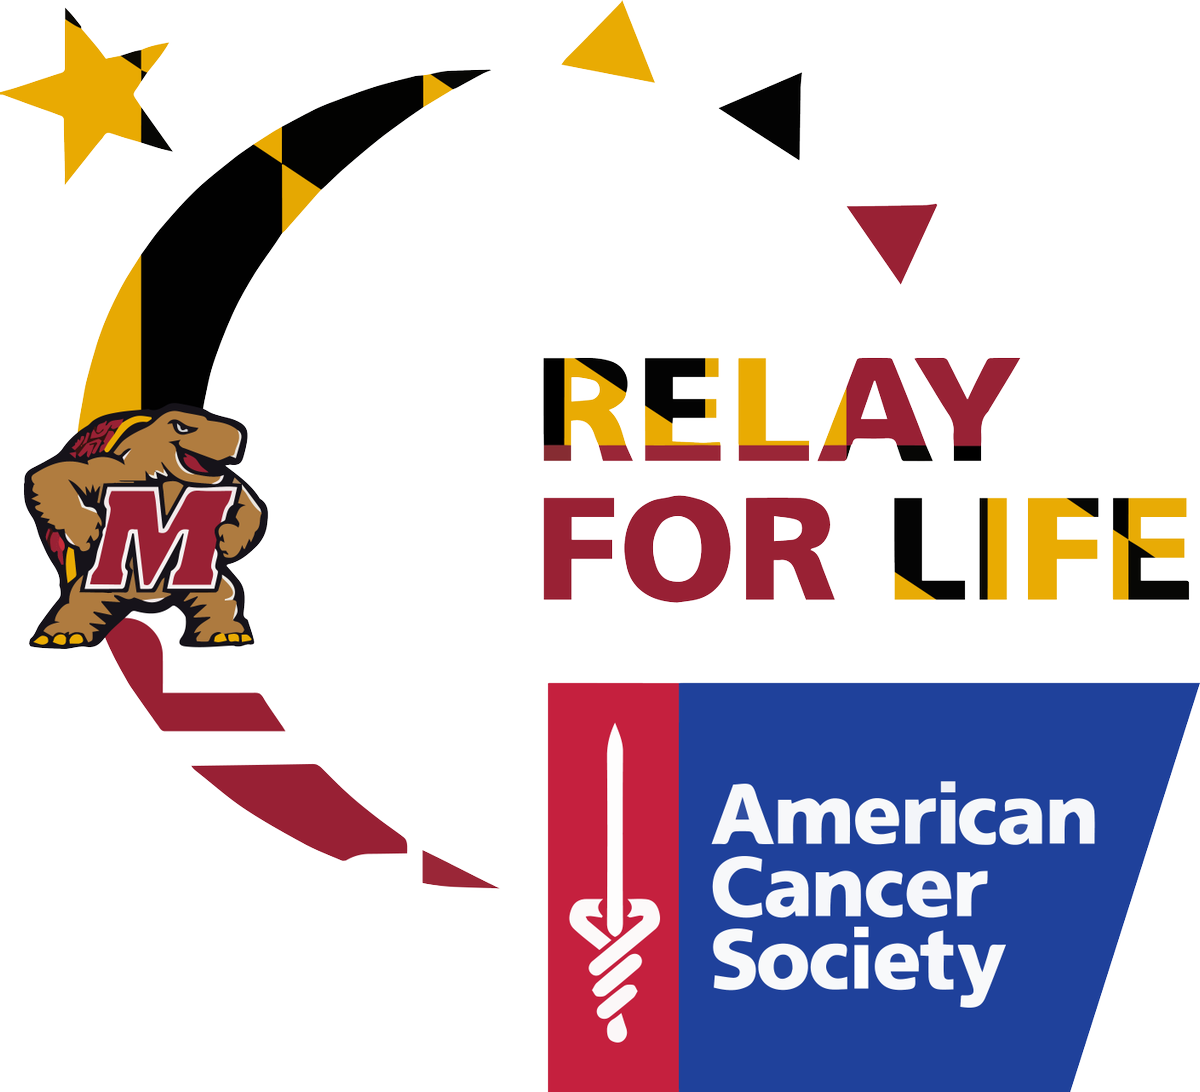 Umd Relay For Life Twitter - Relay For Life Logo 2018 (1200x1092)